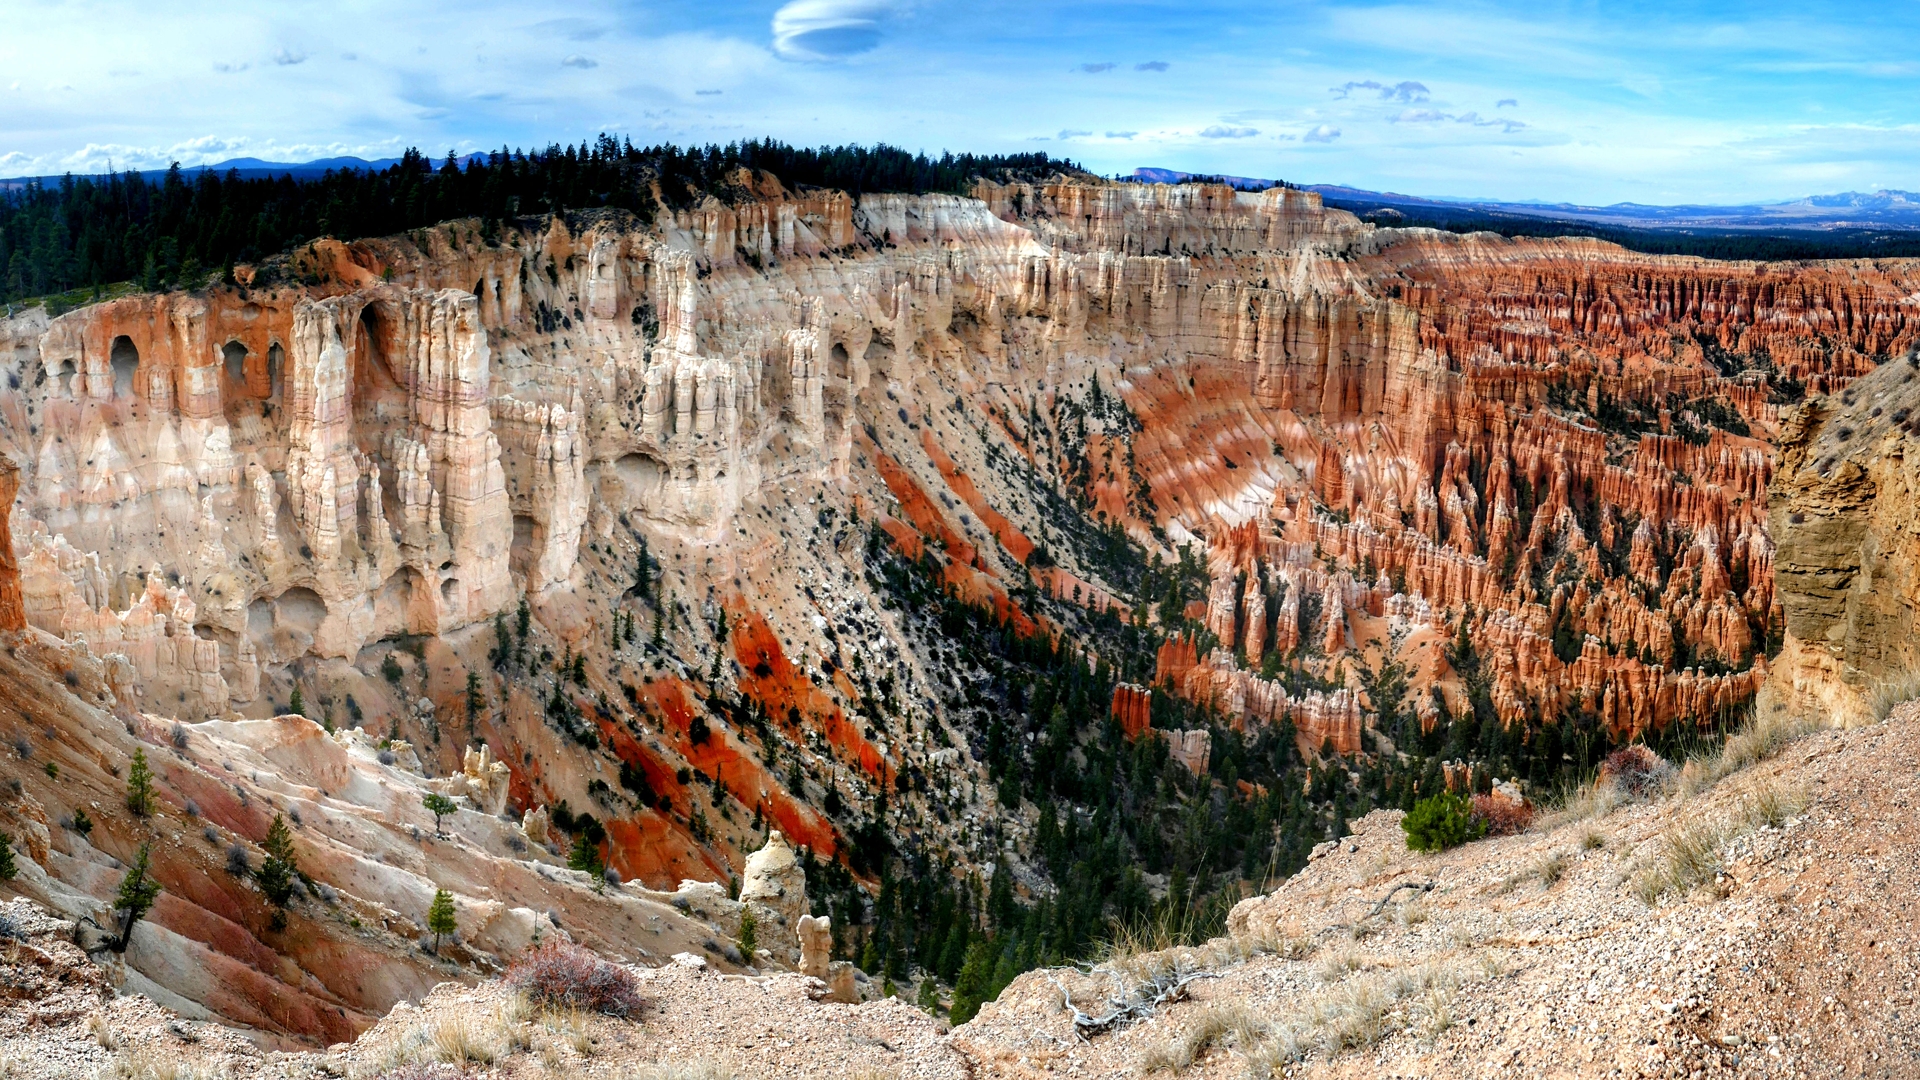 General 1920x1080 landscape nature Utah USA Bryce Canyon National Park trees clouds sky